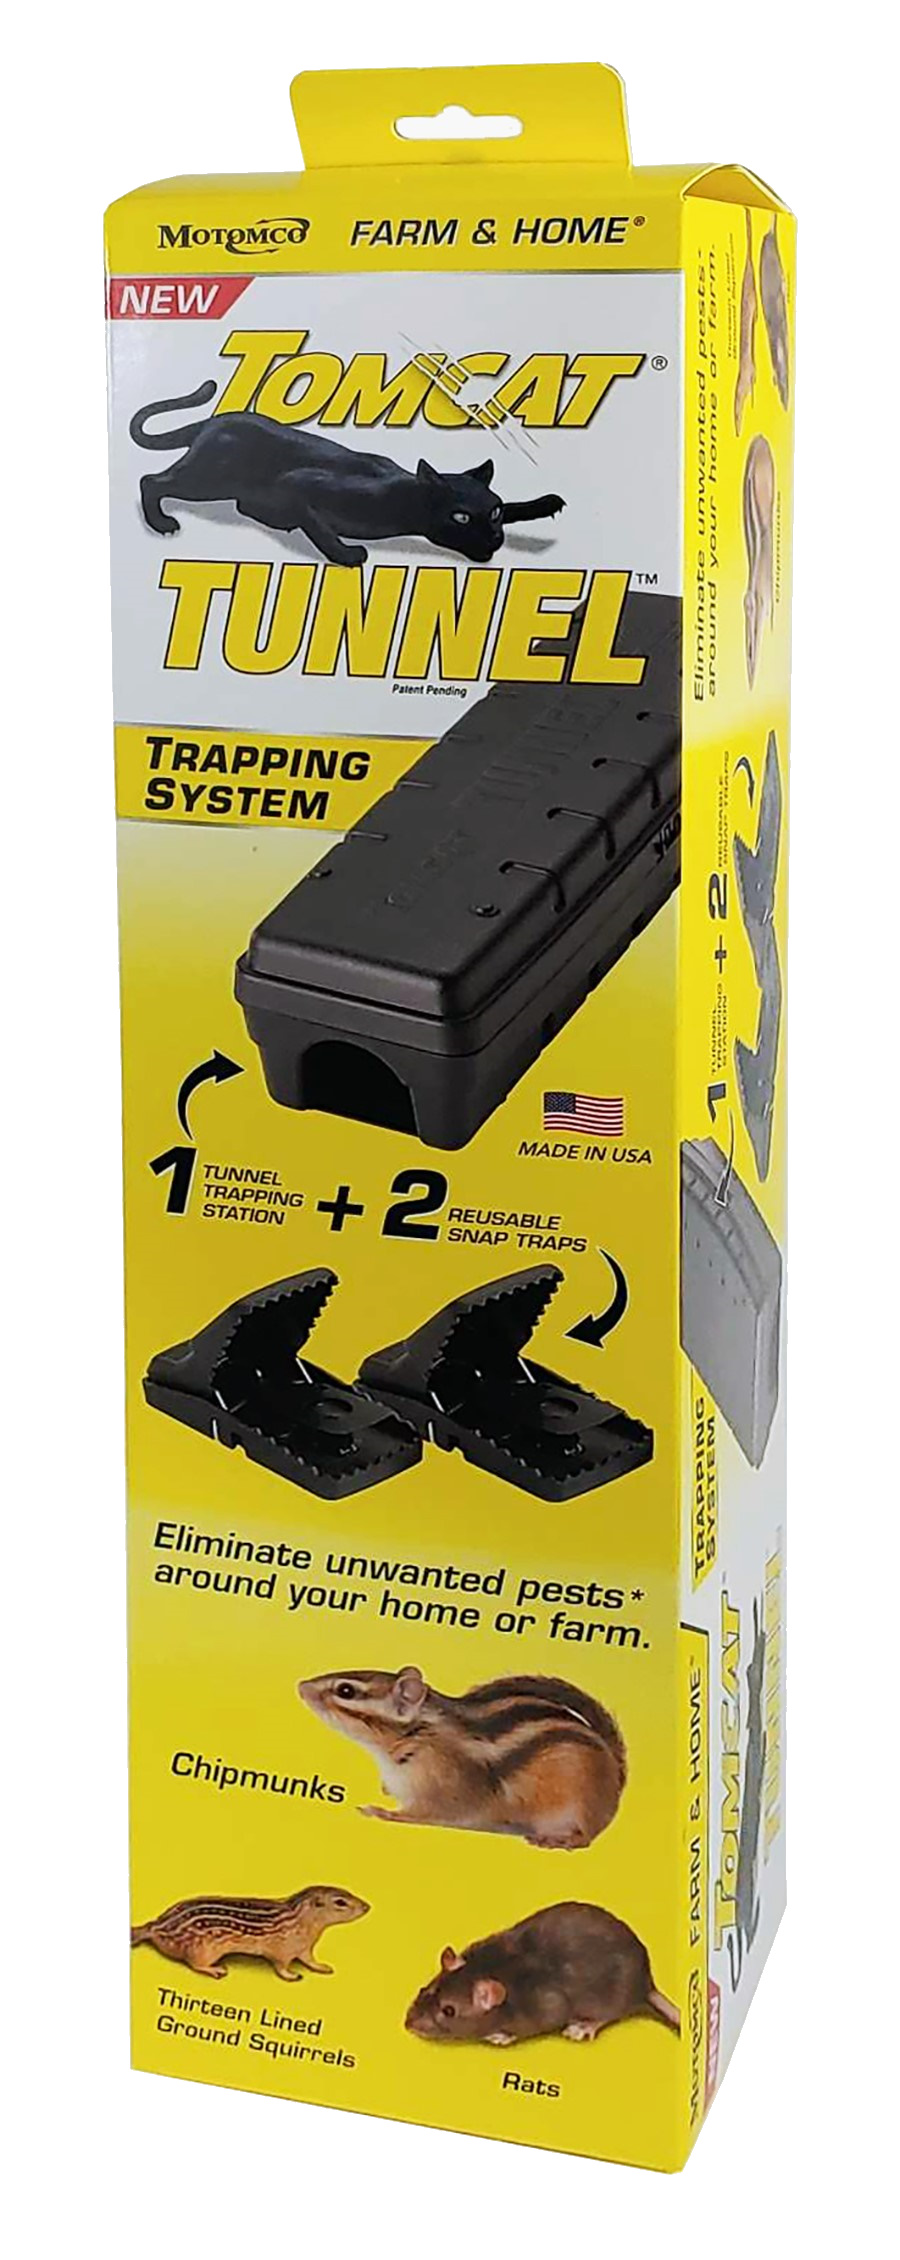 https://www.motomco.com/images/products/bait-stations/34144-Tomcat-Tunnel-Trapping-System.jpg